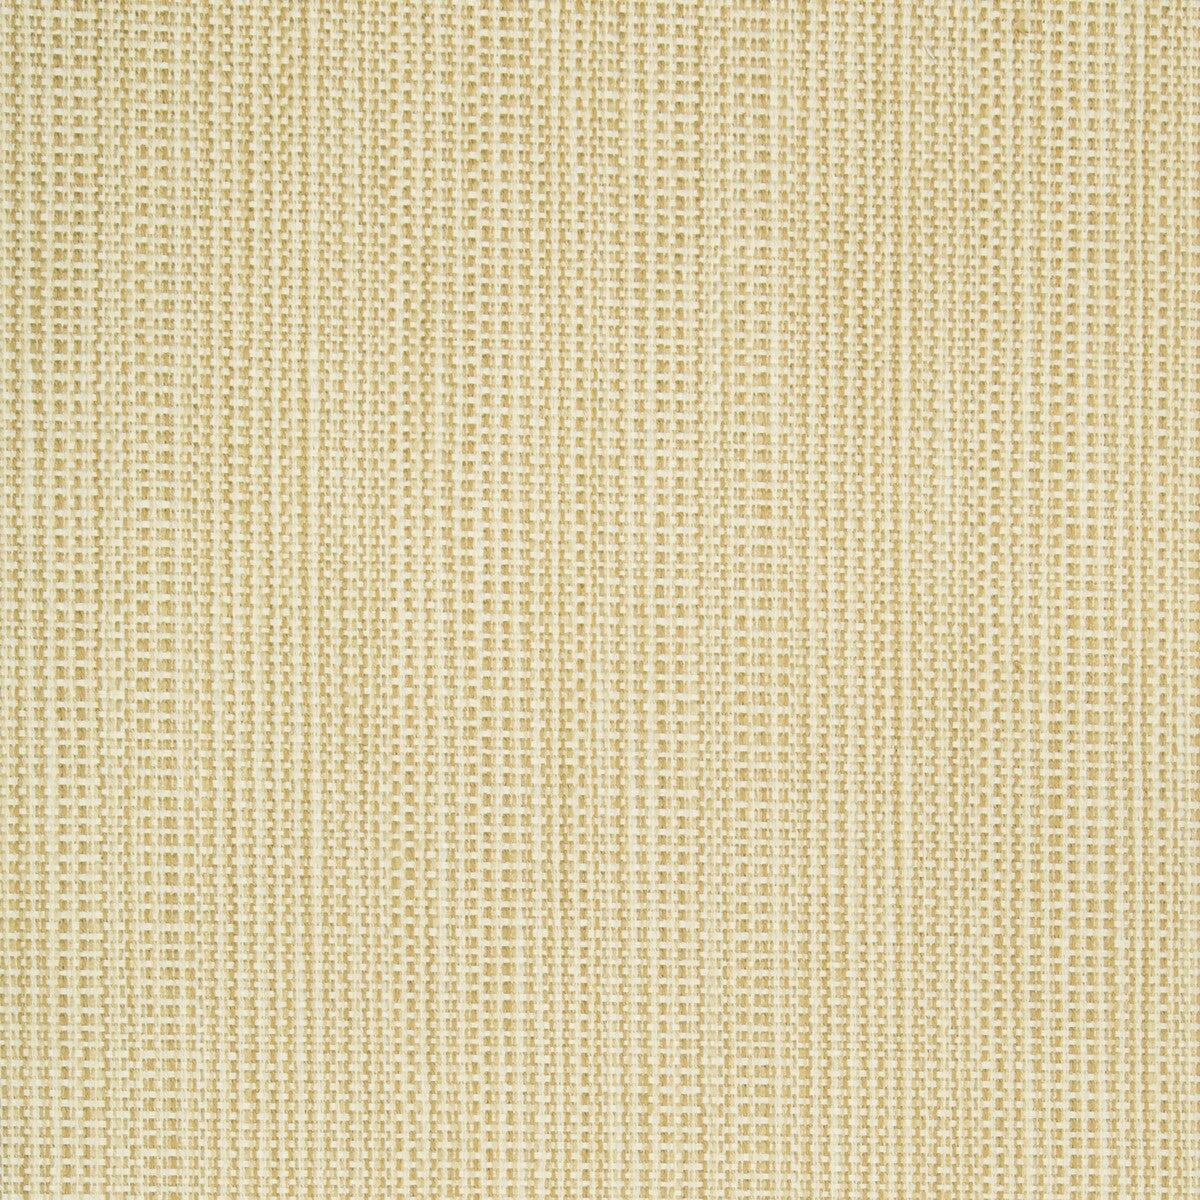 Kravet Contract fabric in 34634-16 color - pattern 34634.16.0 - by Kravet Contract in the Crypton Incase collection